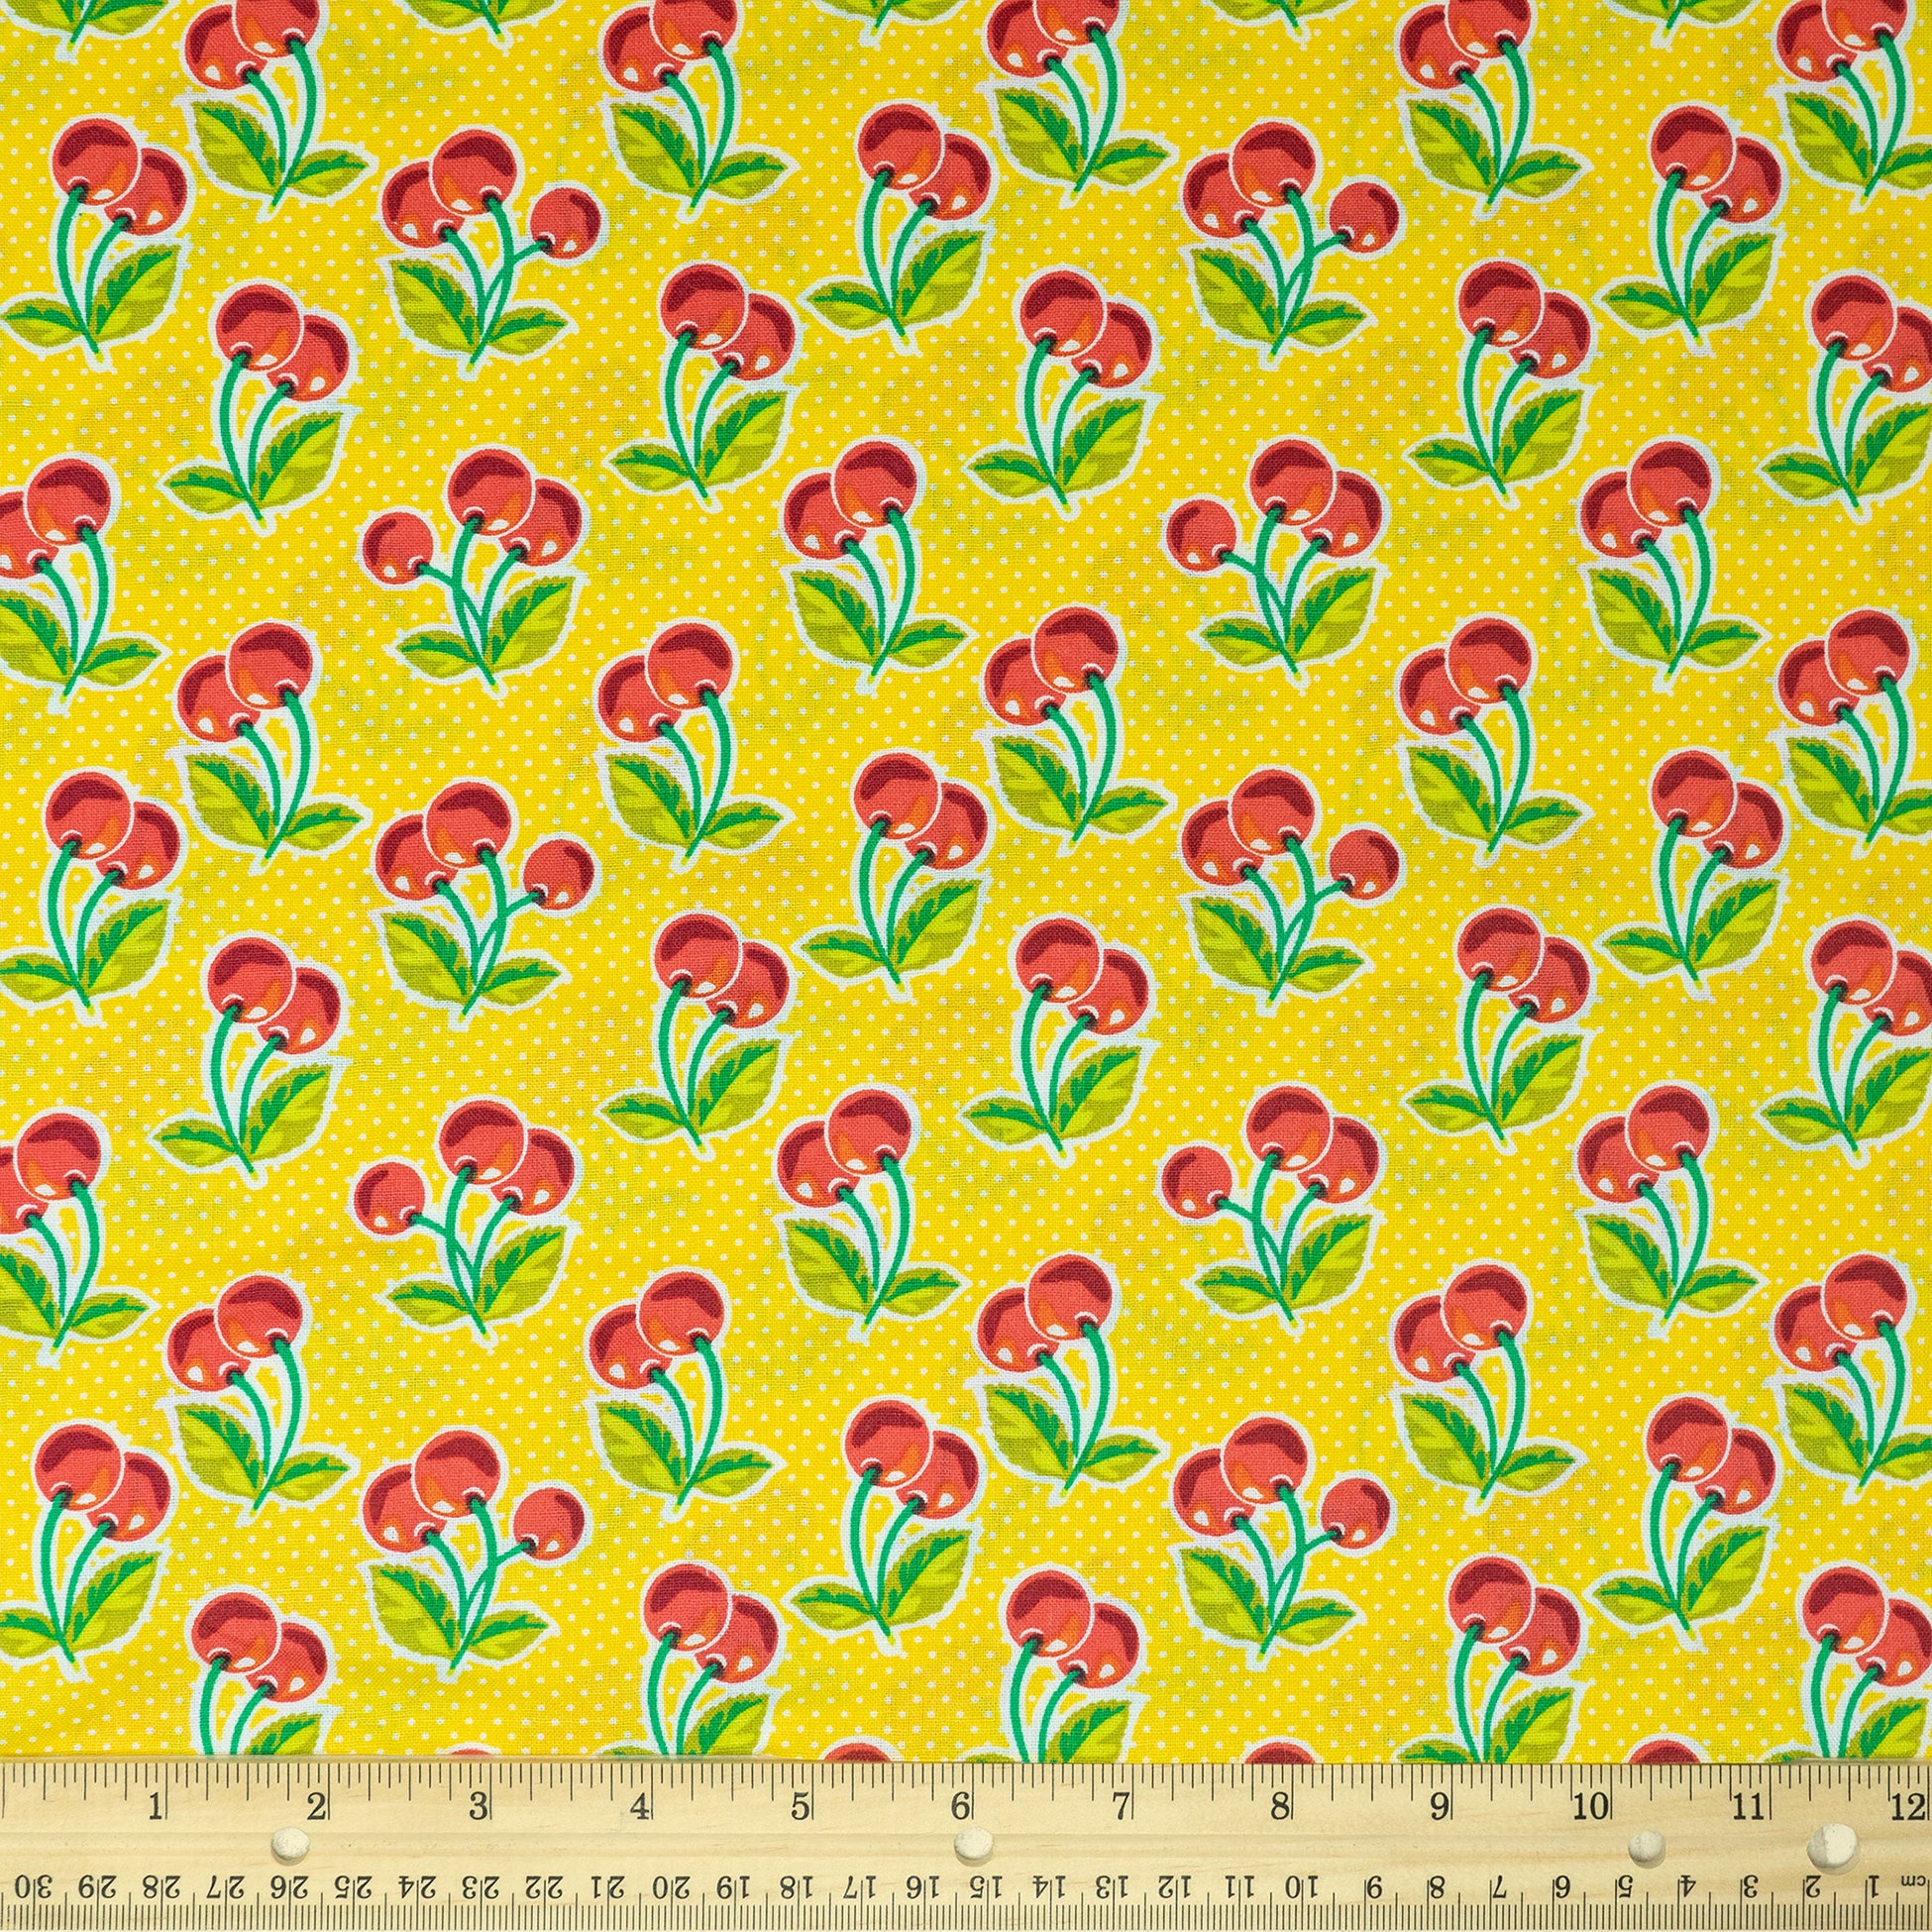 Waverly Inspirations Cotton 44" Cherry Sunshine Color Sewing Fabric by the Yard